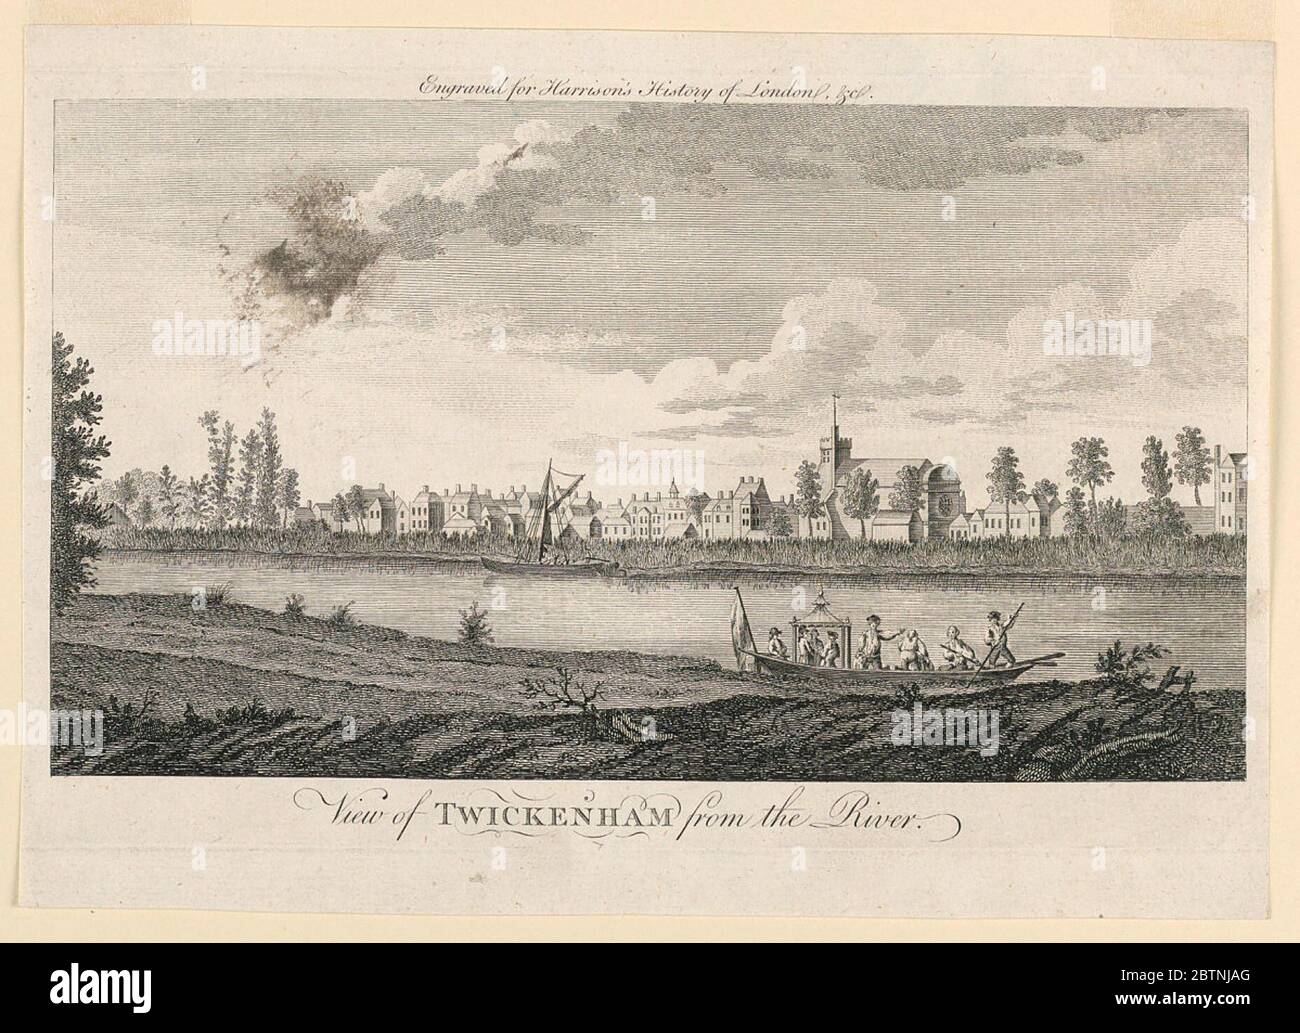 View of Twickenham from the River Thames from Walter Harrisons History of London. Research in ProgressThe view is taken looking across sthe Thames River, with the town of Twickenham (Berkshire) on the opposite bank. A pleasure craft with figures in the foreground. Stock Photo